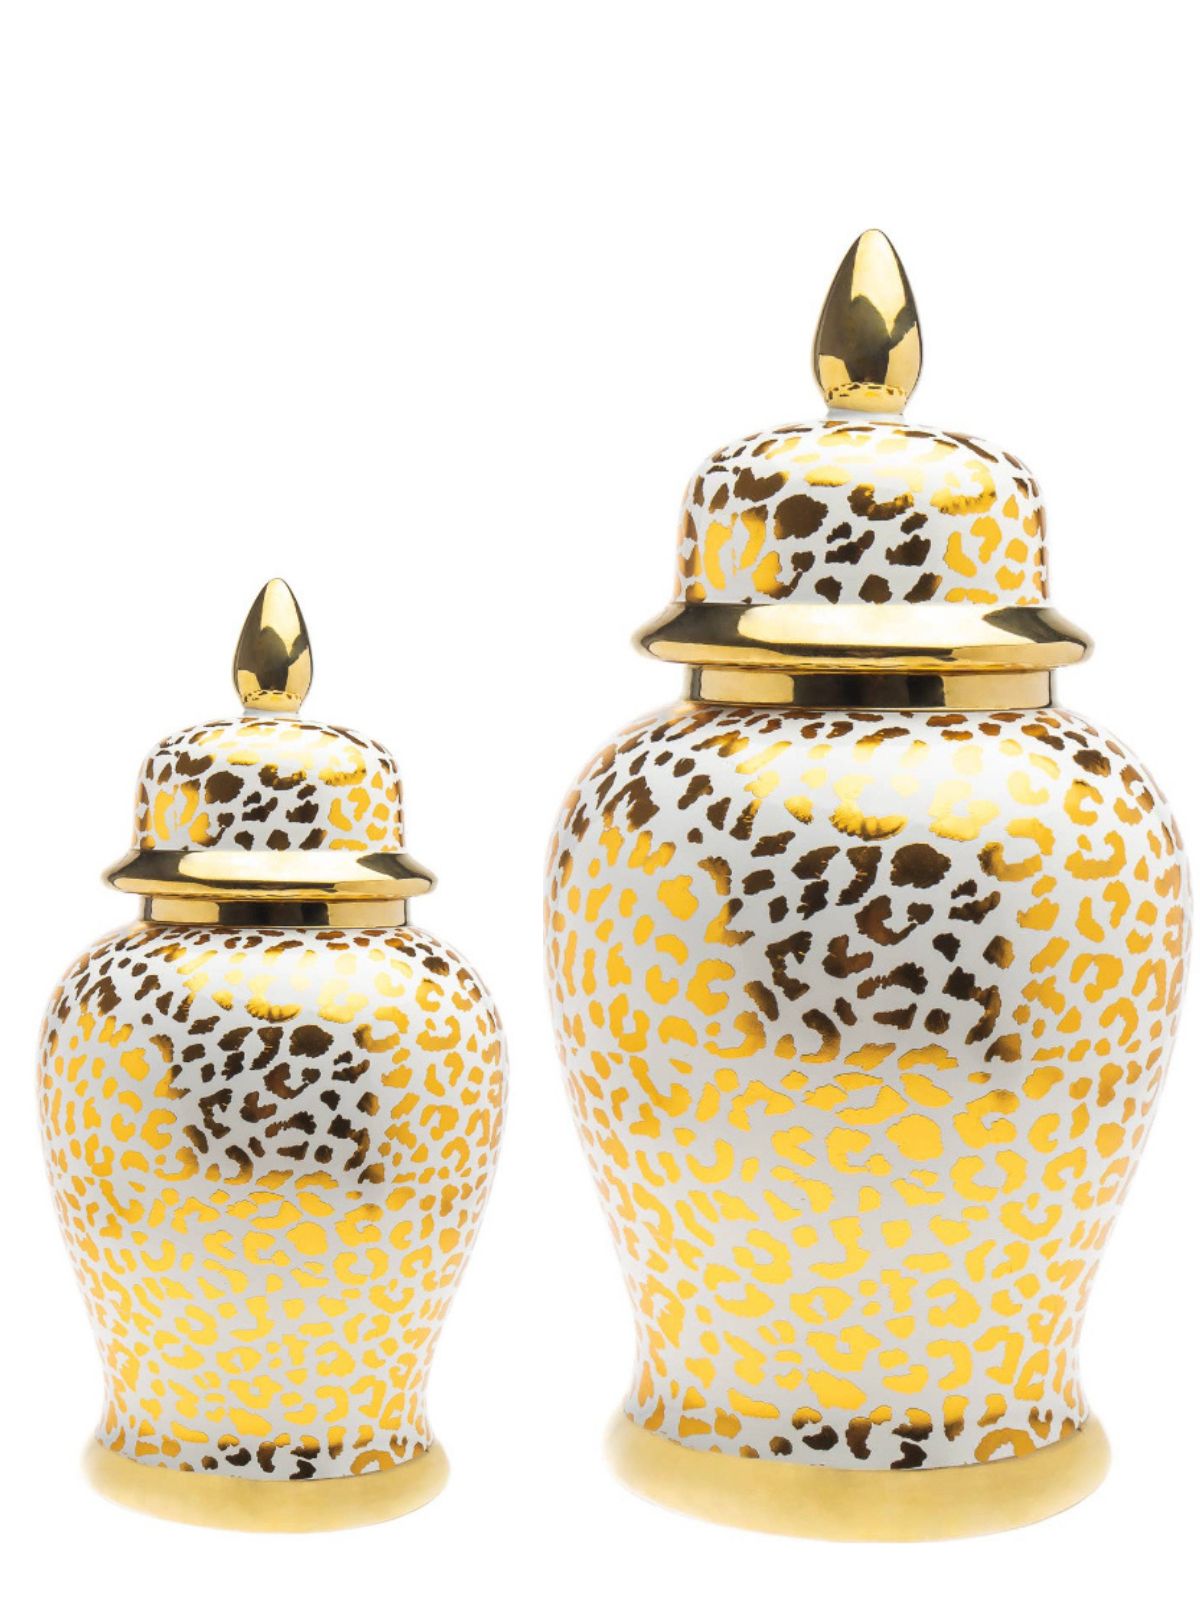 Leopard Print Porcelain Ginger Jar with an elegant gold-tone rim and base. Available in 2 sizes